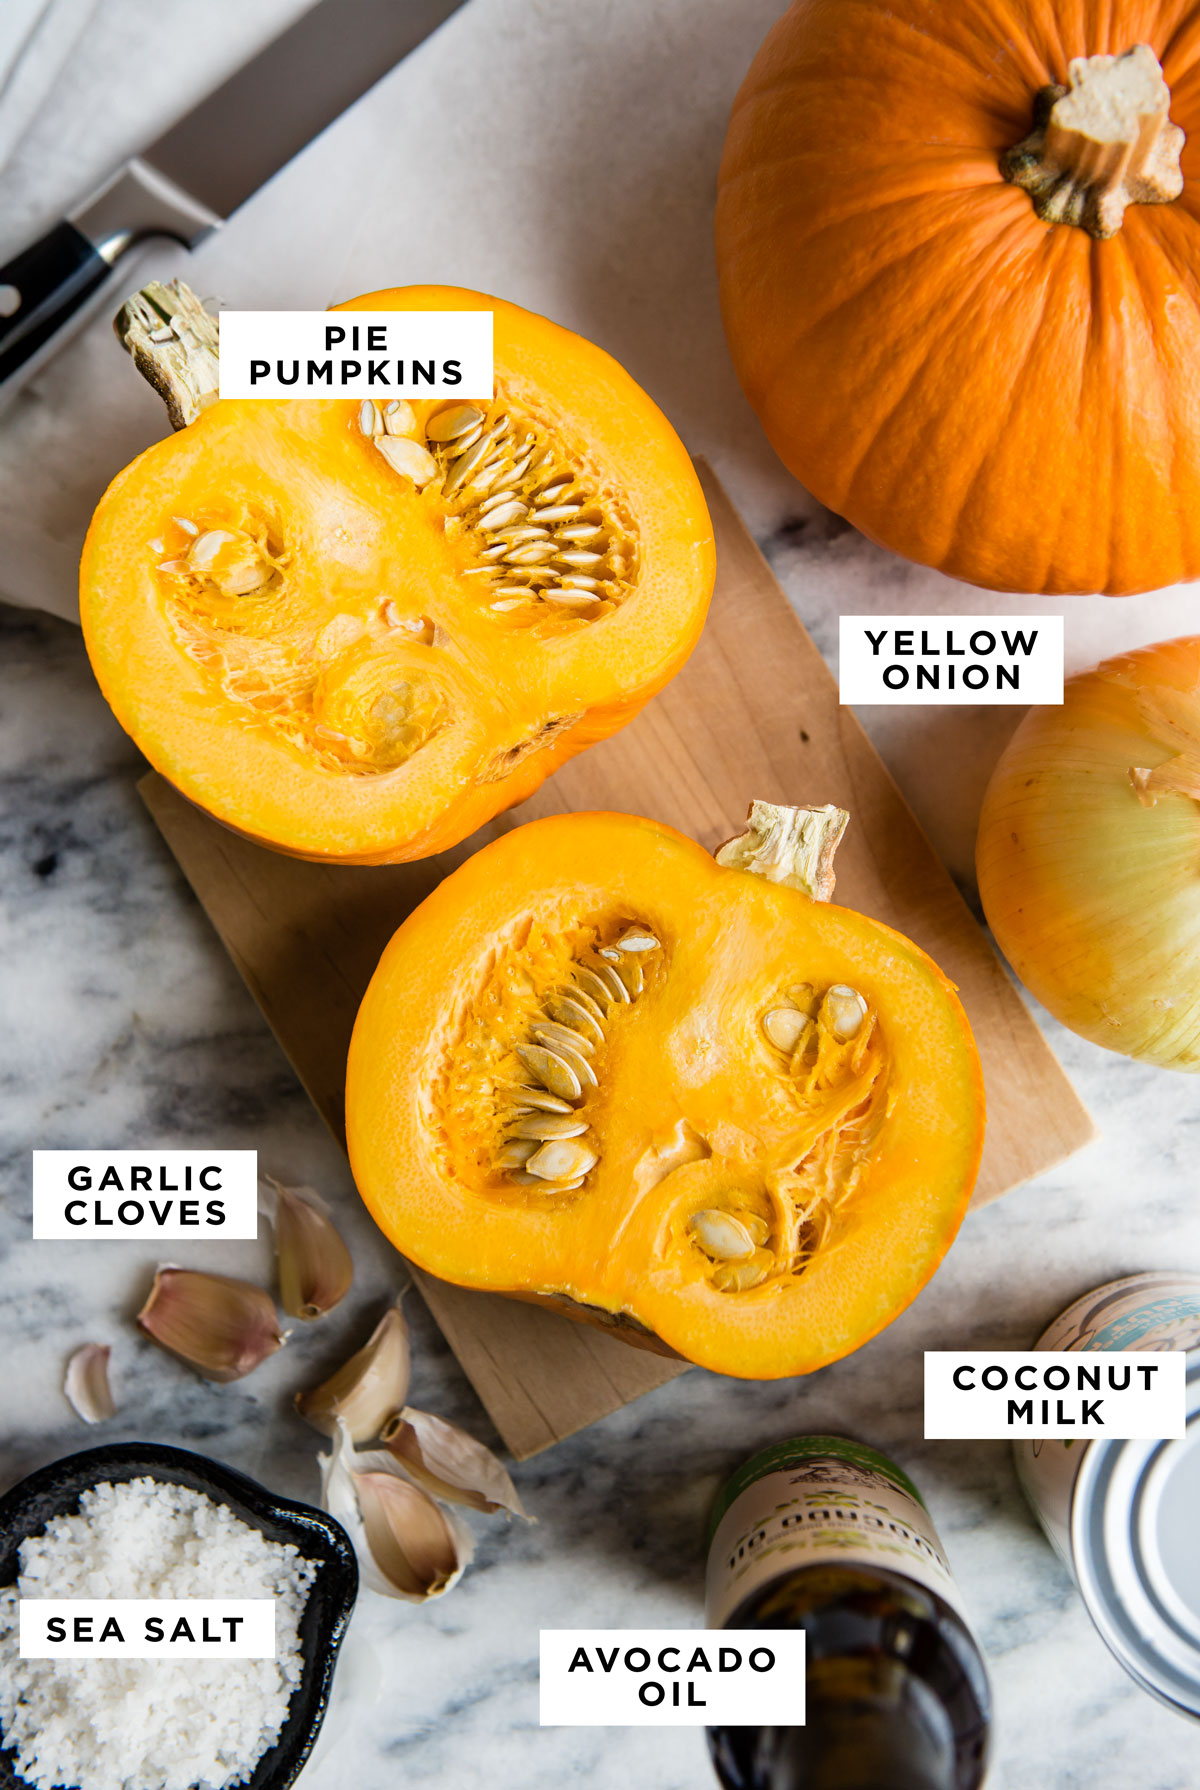 labeled ingredients for a pumpkin soup recipe including pie pumpkins, yellow onion, garlic cloves, coconut milk, sea salt and avocado oil.